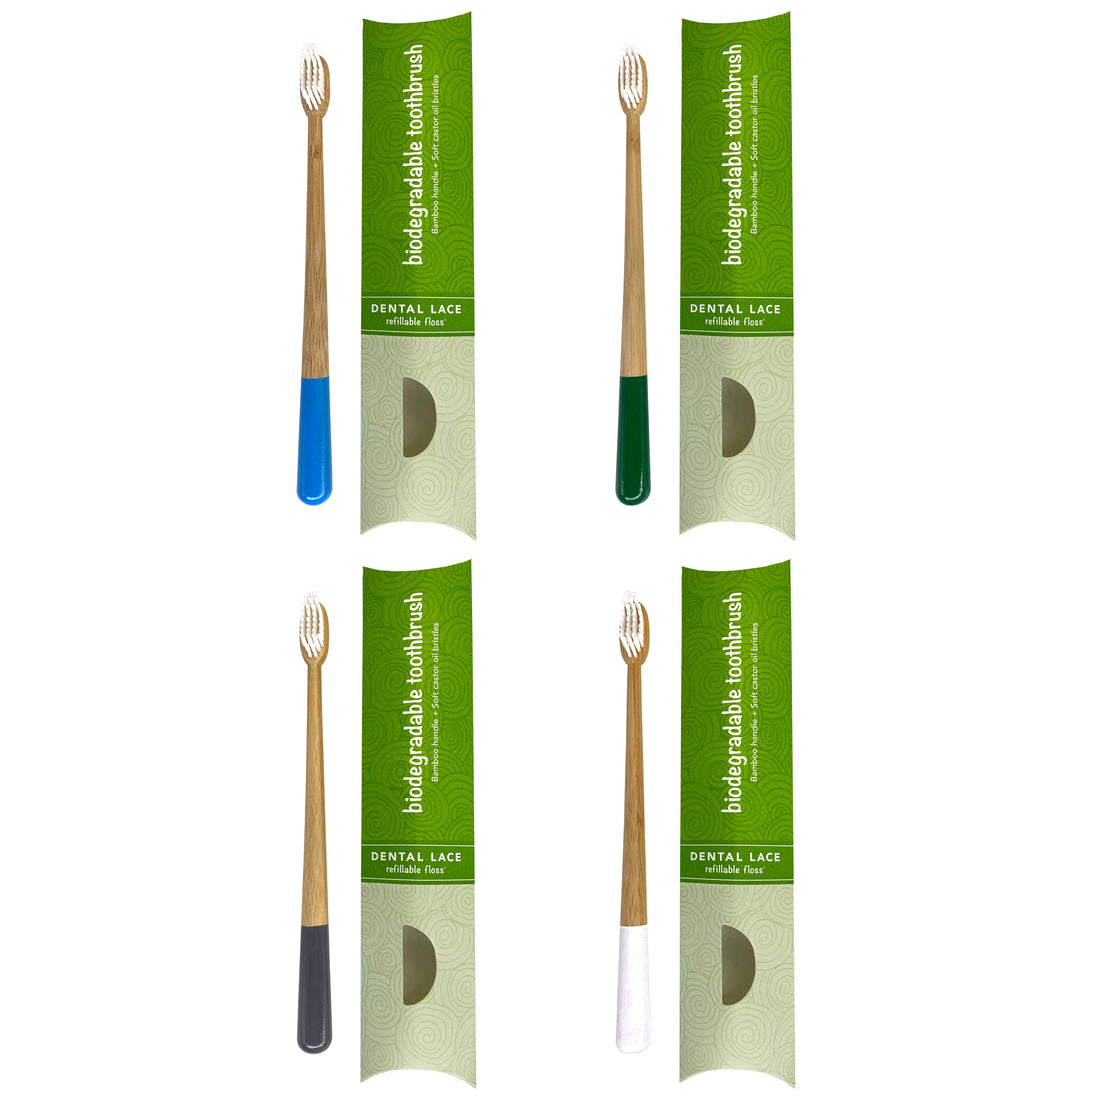 DENTAL LACE BAMBOO TOOTHBRUSH - 4 PACK